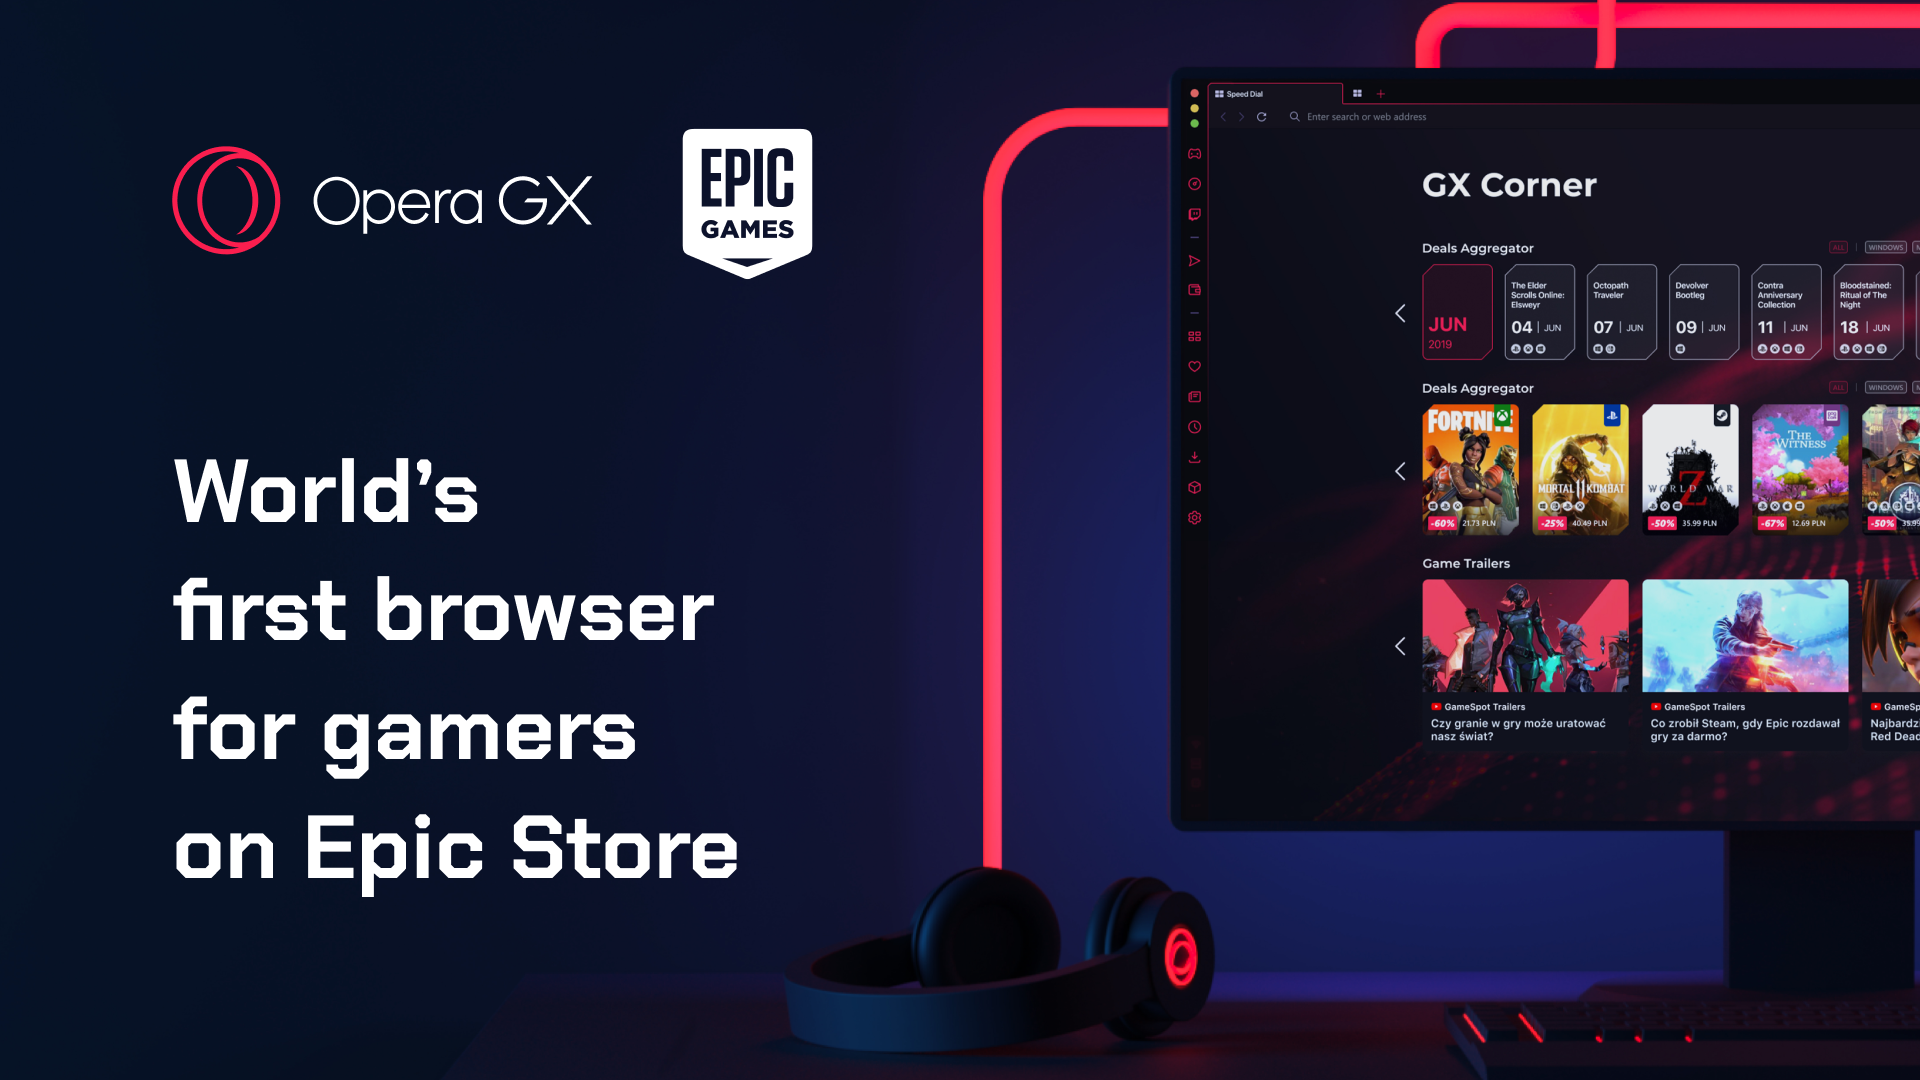 Opera GX on Epic Games Store